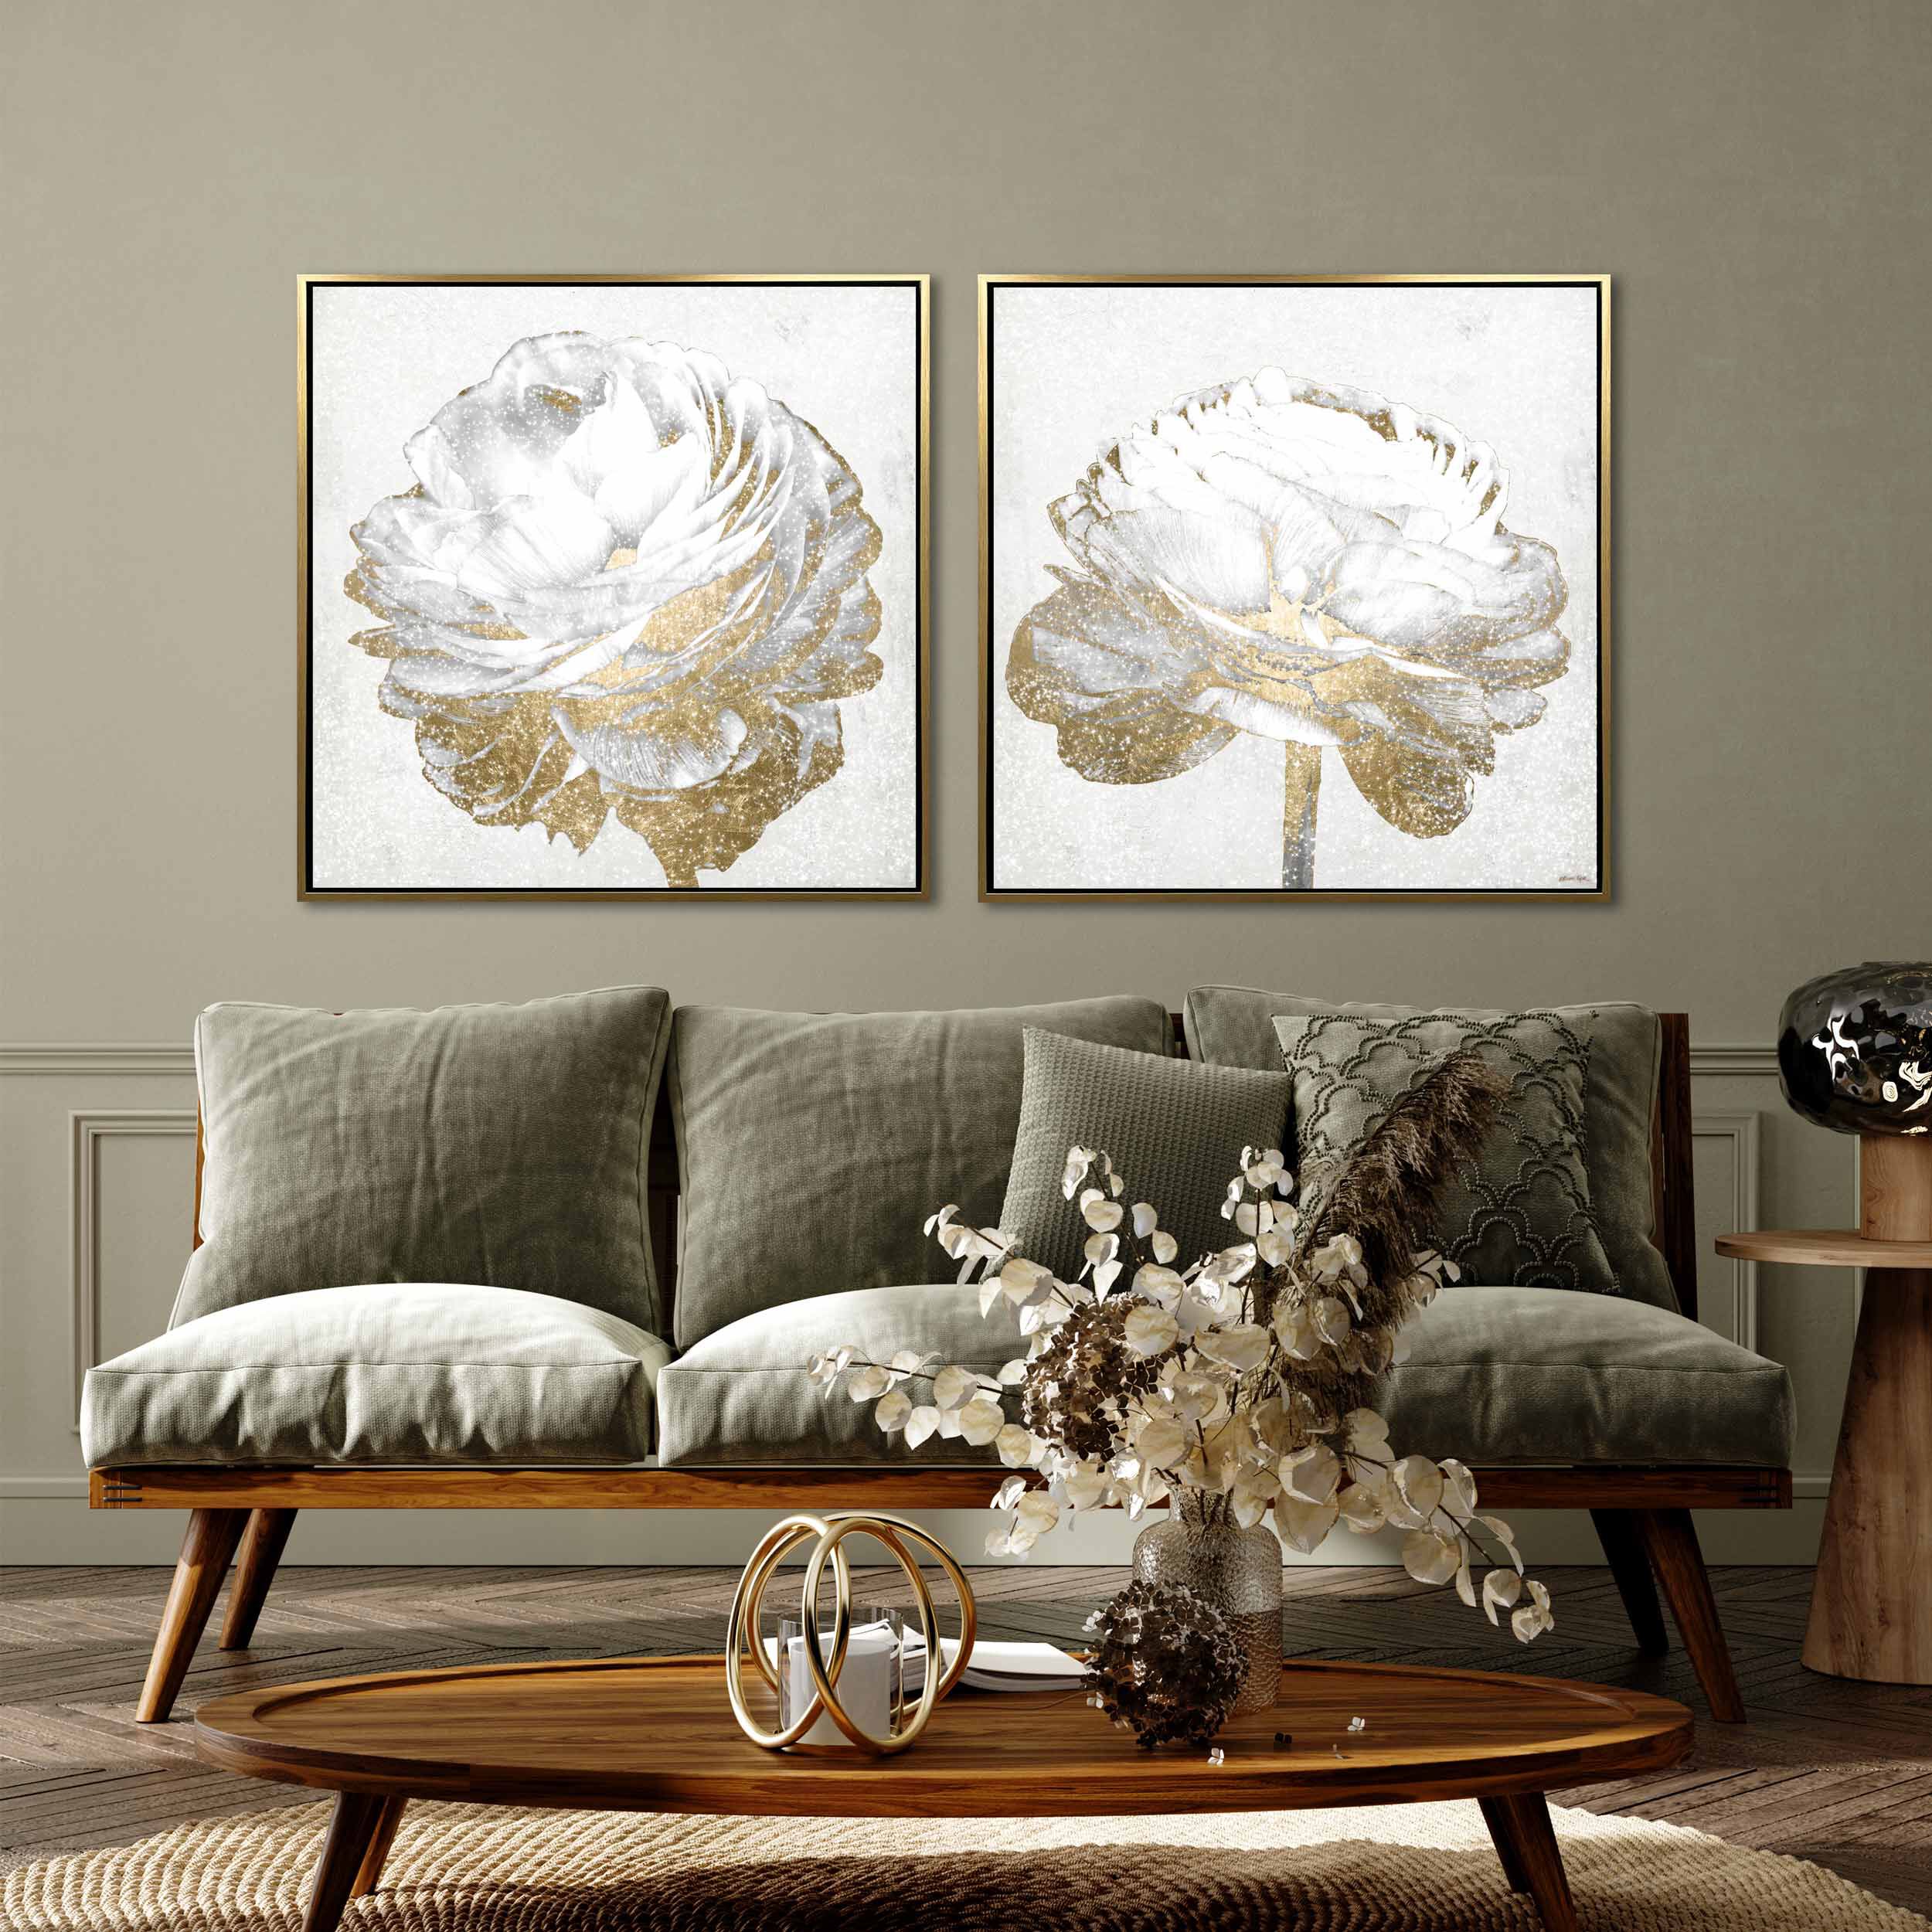 Shop Specialty Wall Art & Home Decor at Oliver Gal